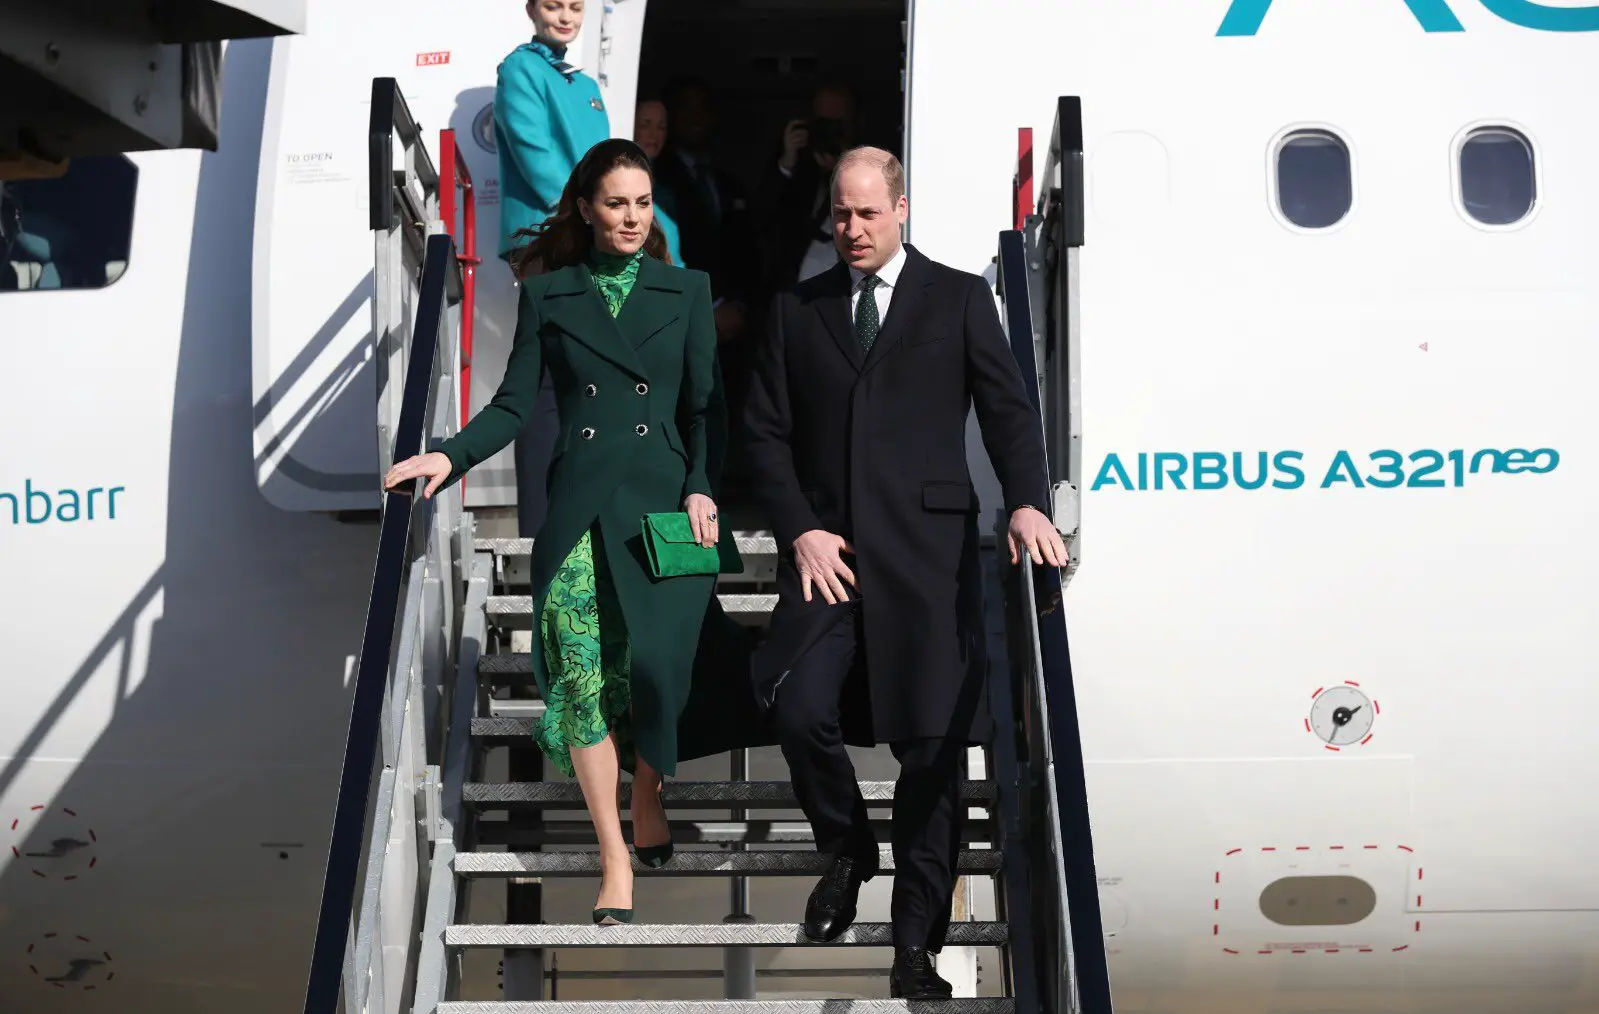 The Duke and Duchess of Cambridge arrived in Ireland for Day one